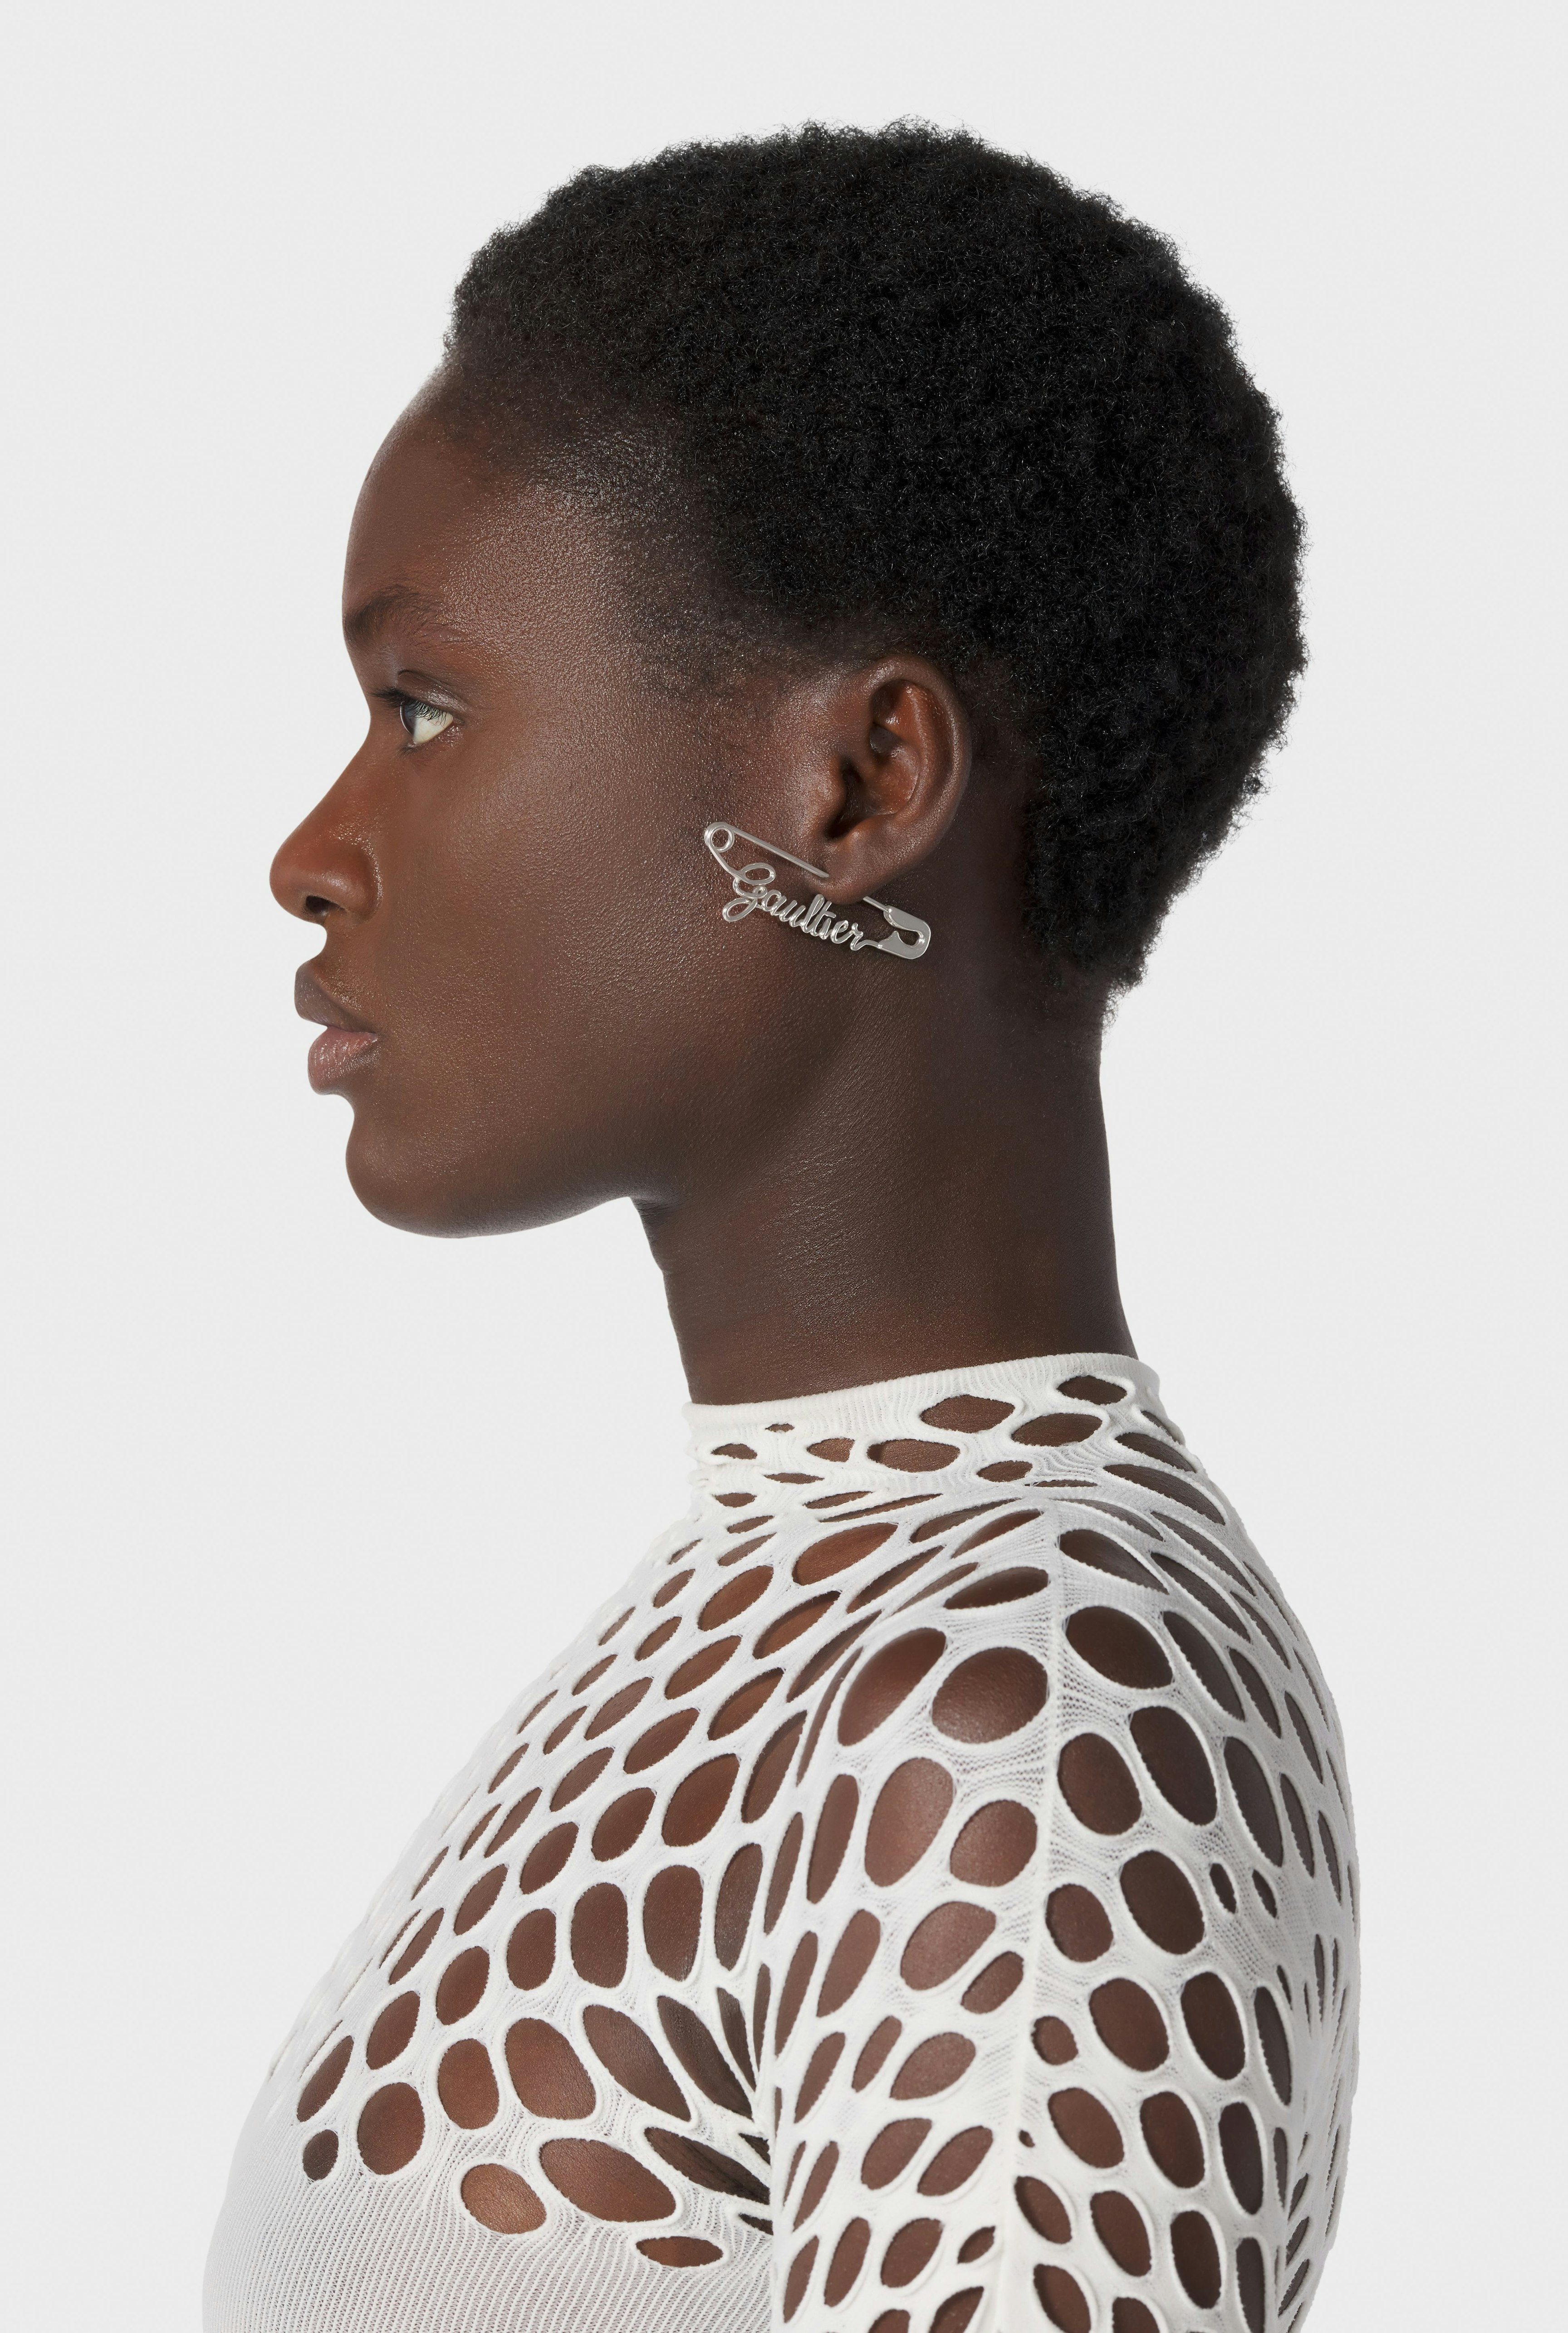 The Silver-Tone Gaultier Safety Pin Earring hover